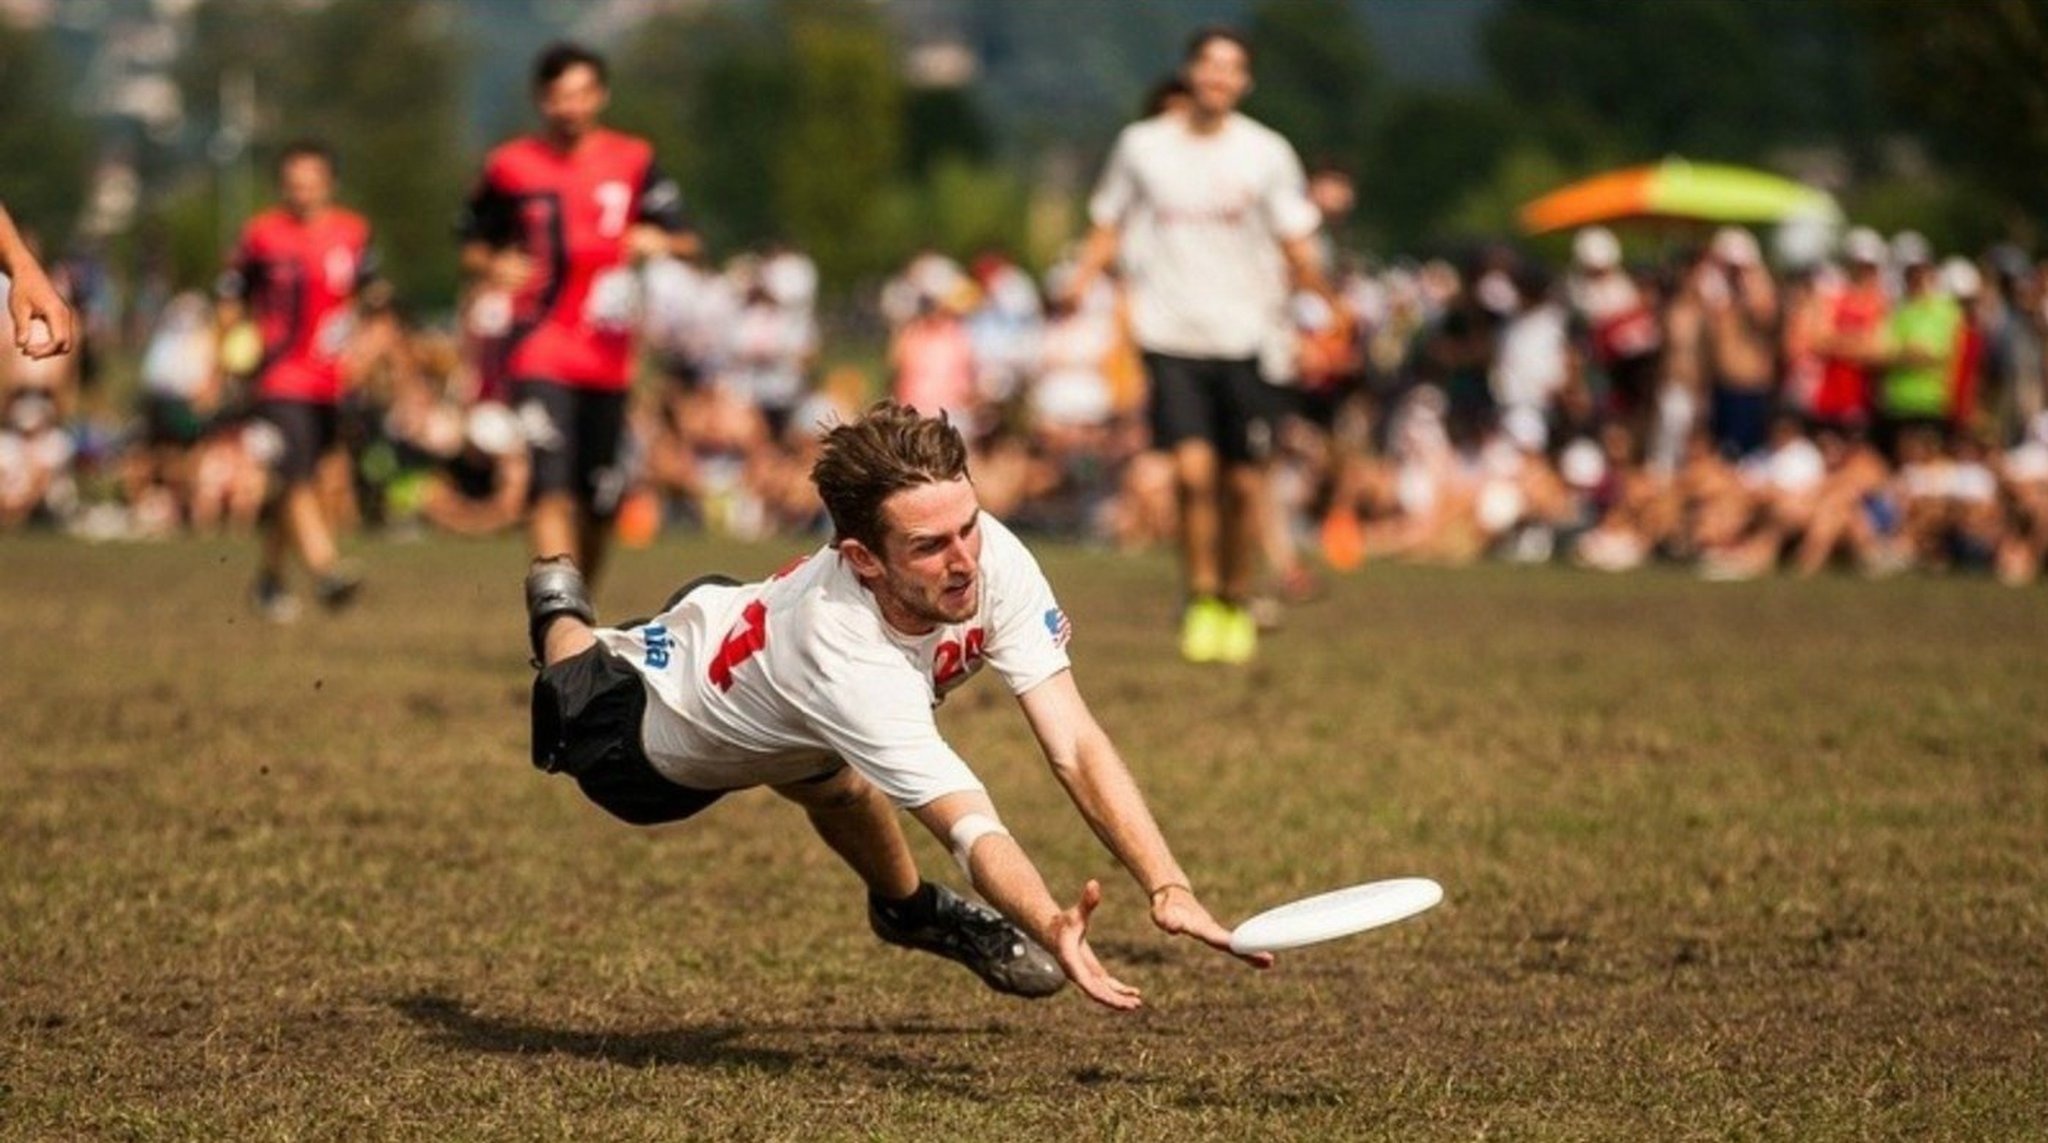 Frisbee: World Flying Disc Championships 2022 in Warren County, Hotspots in USA, Ultimate Frisbee the USA Team. 2050x1150 HD Wallpaper.